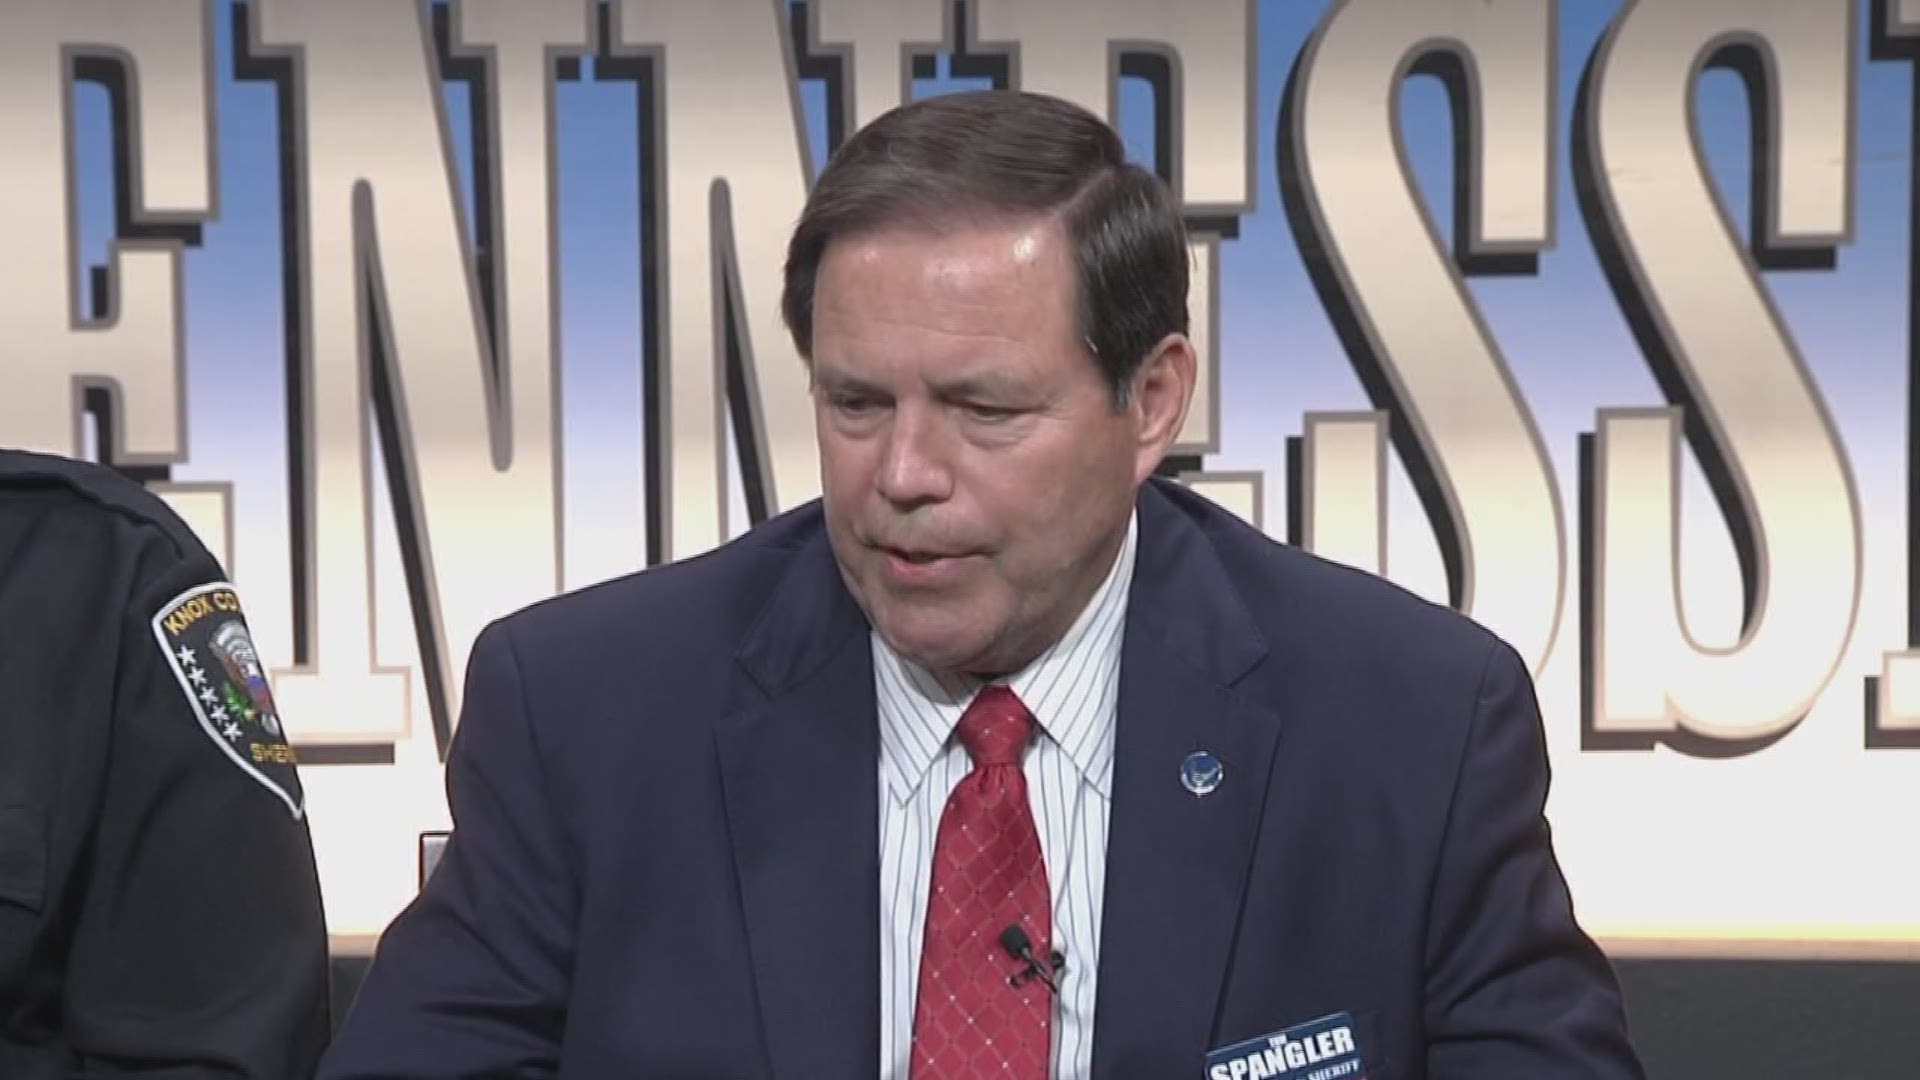 Candidates for Knox County sheriff Lee Tramel and Tom Spangler talk about the race.